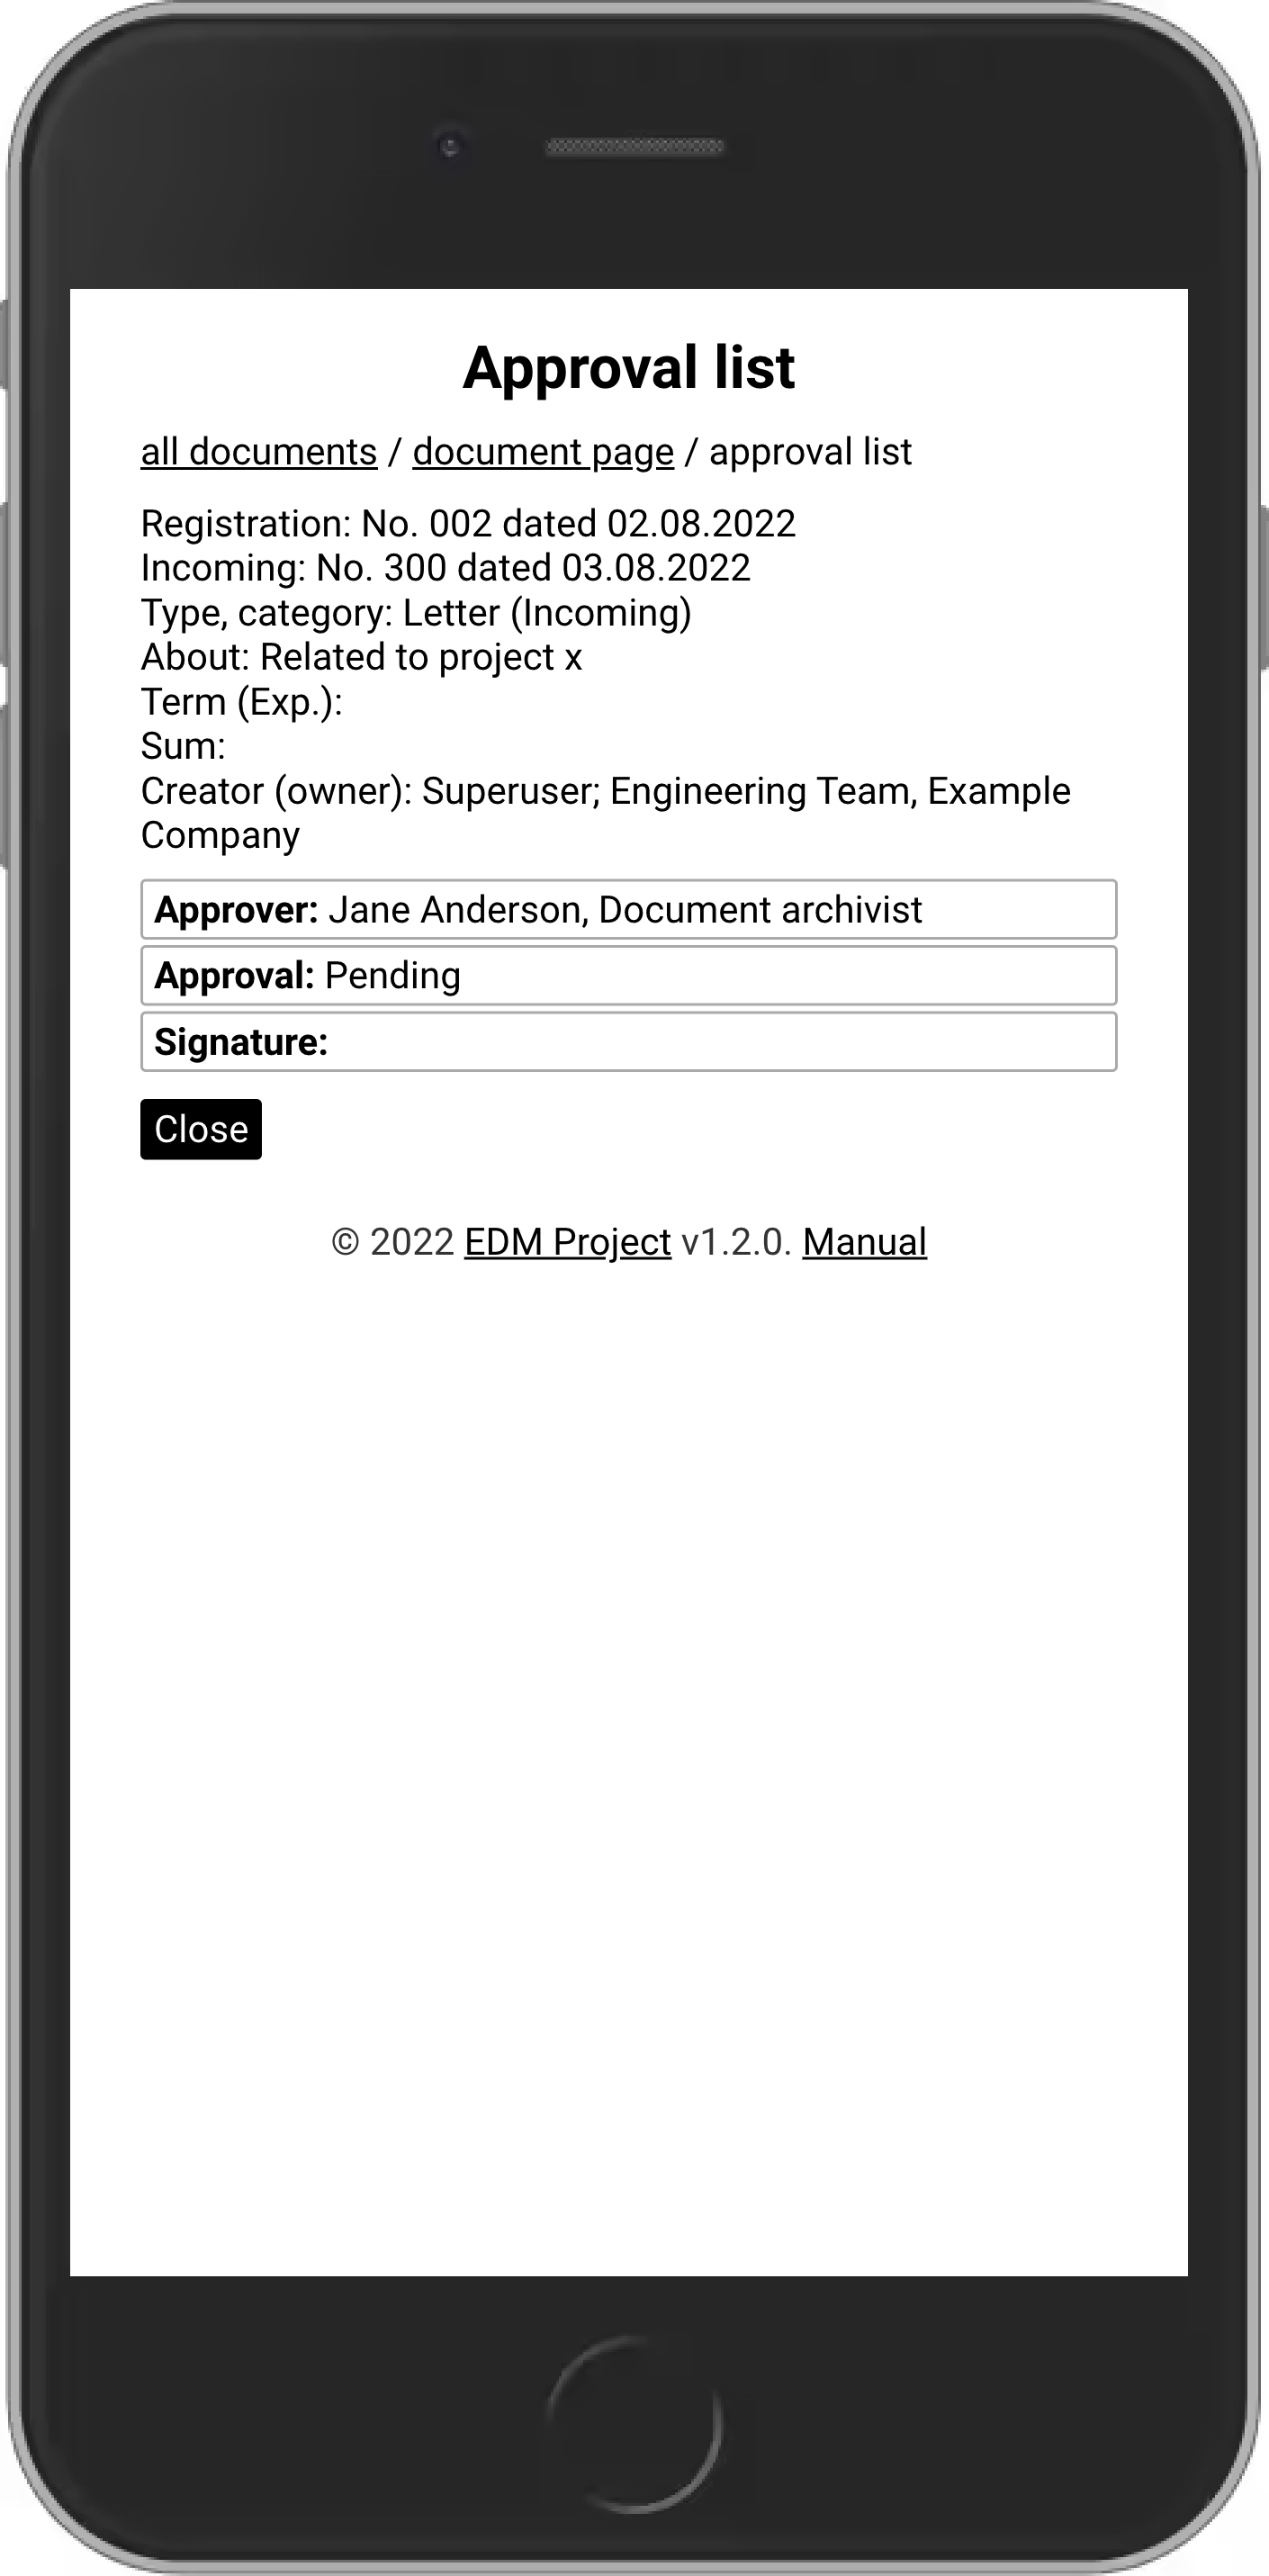 Approval list mobile